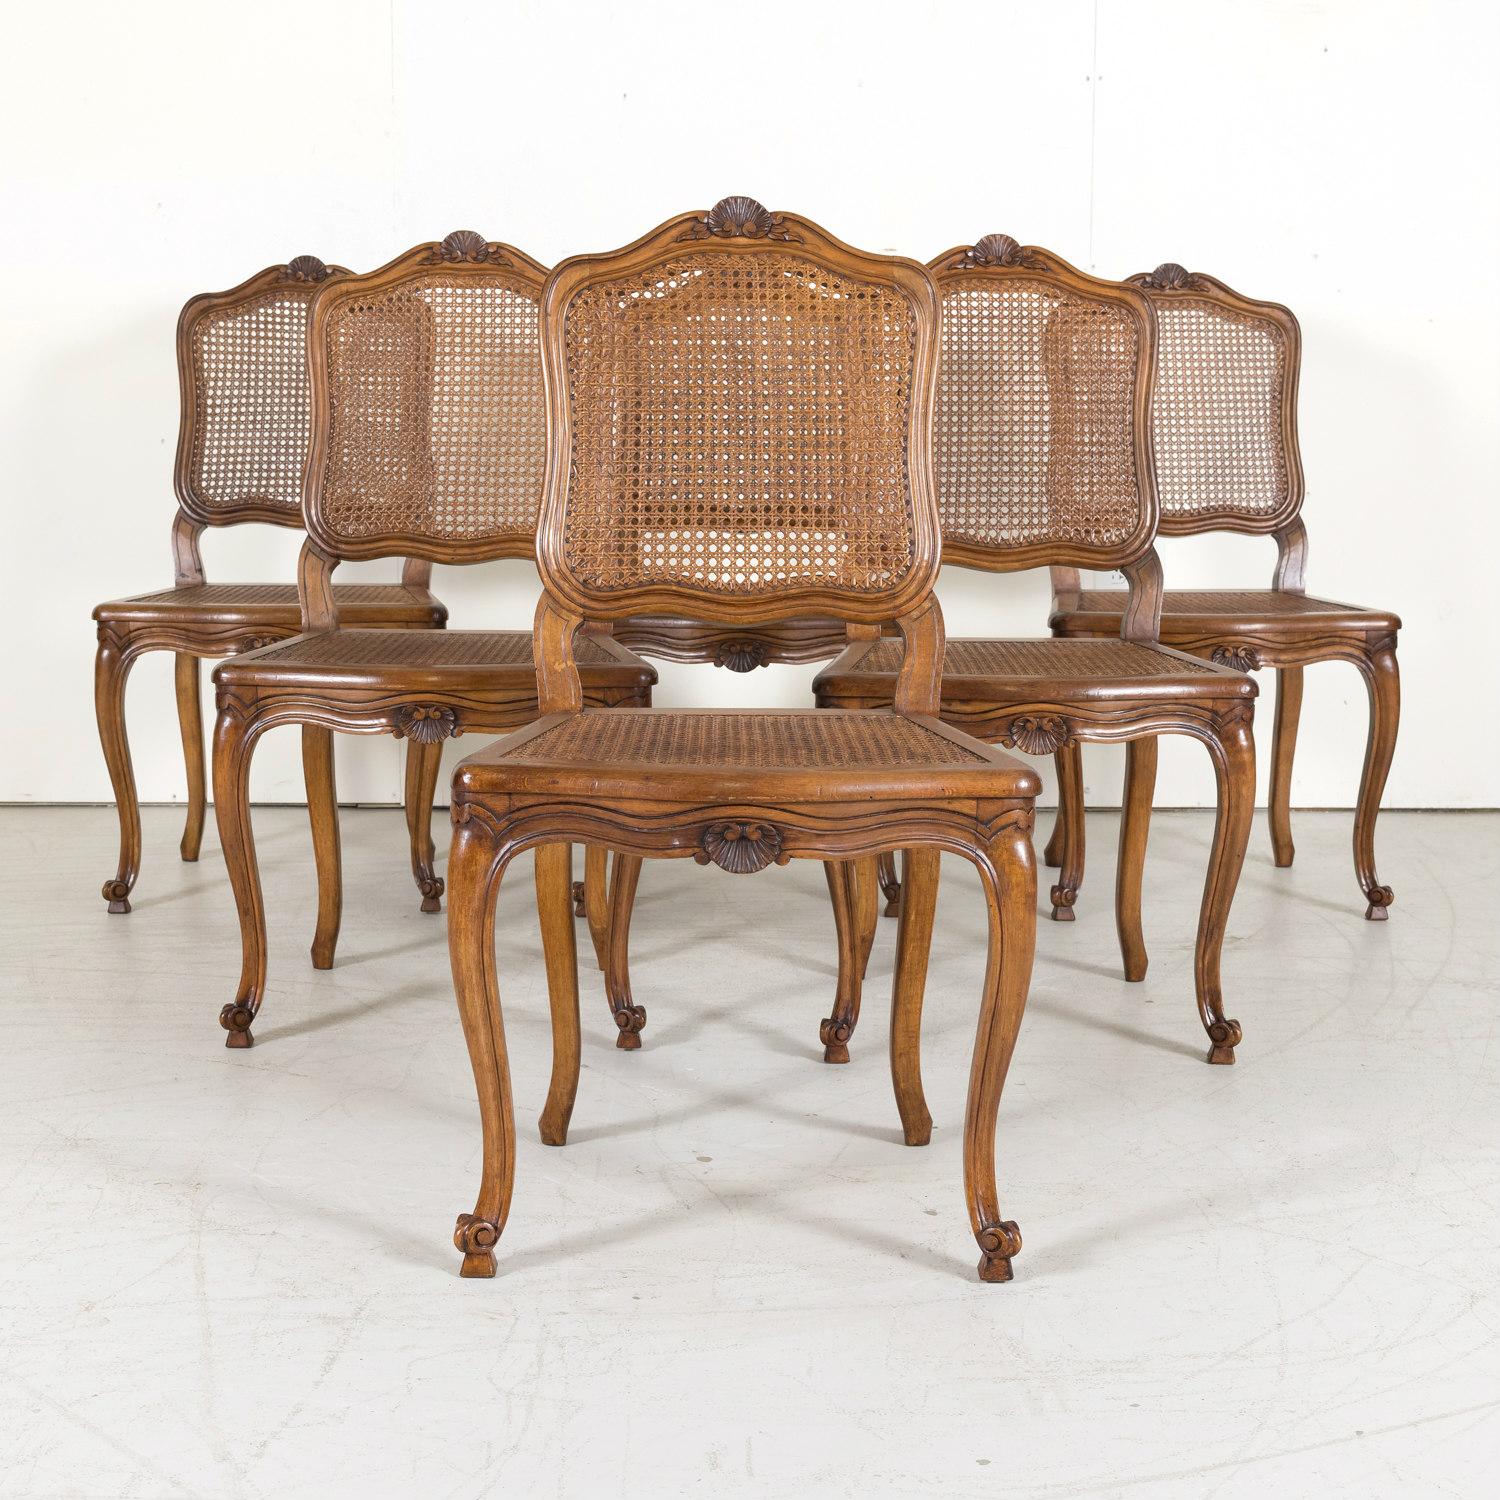 A lovely set of 6 French Country Louis XV style carved dining side chairs from Provence with hand-caned seats and backs, circa early 1900s. Featuring traditional Provençal carvings, each chair is handcrafted from solid walnut and decorated with